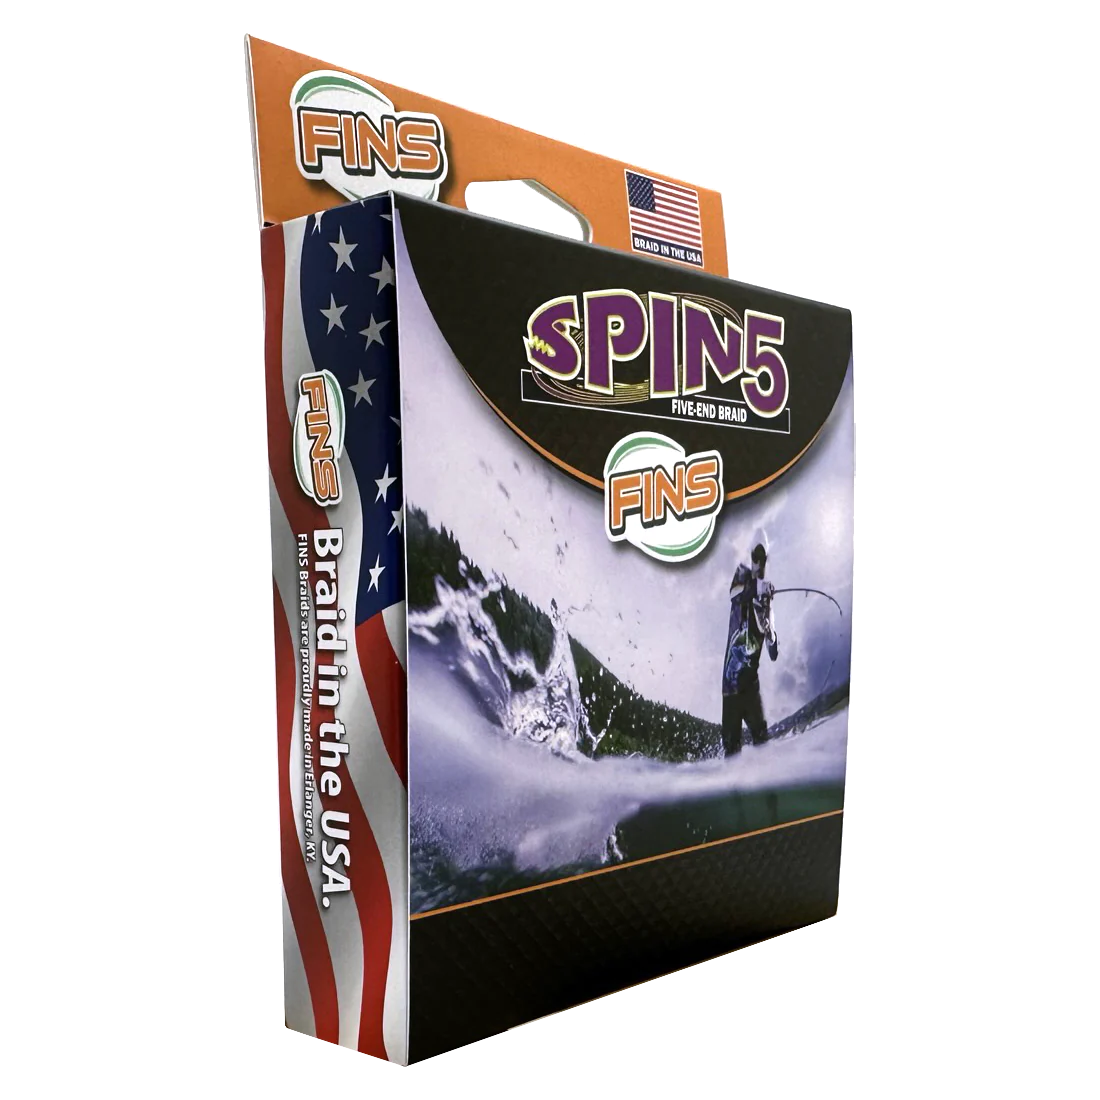 FINS Spin5 Fishing Braid – The Fishing Hunting Store